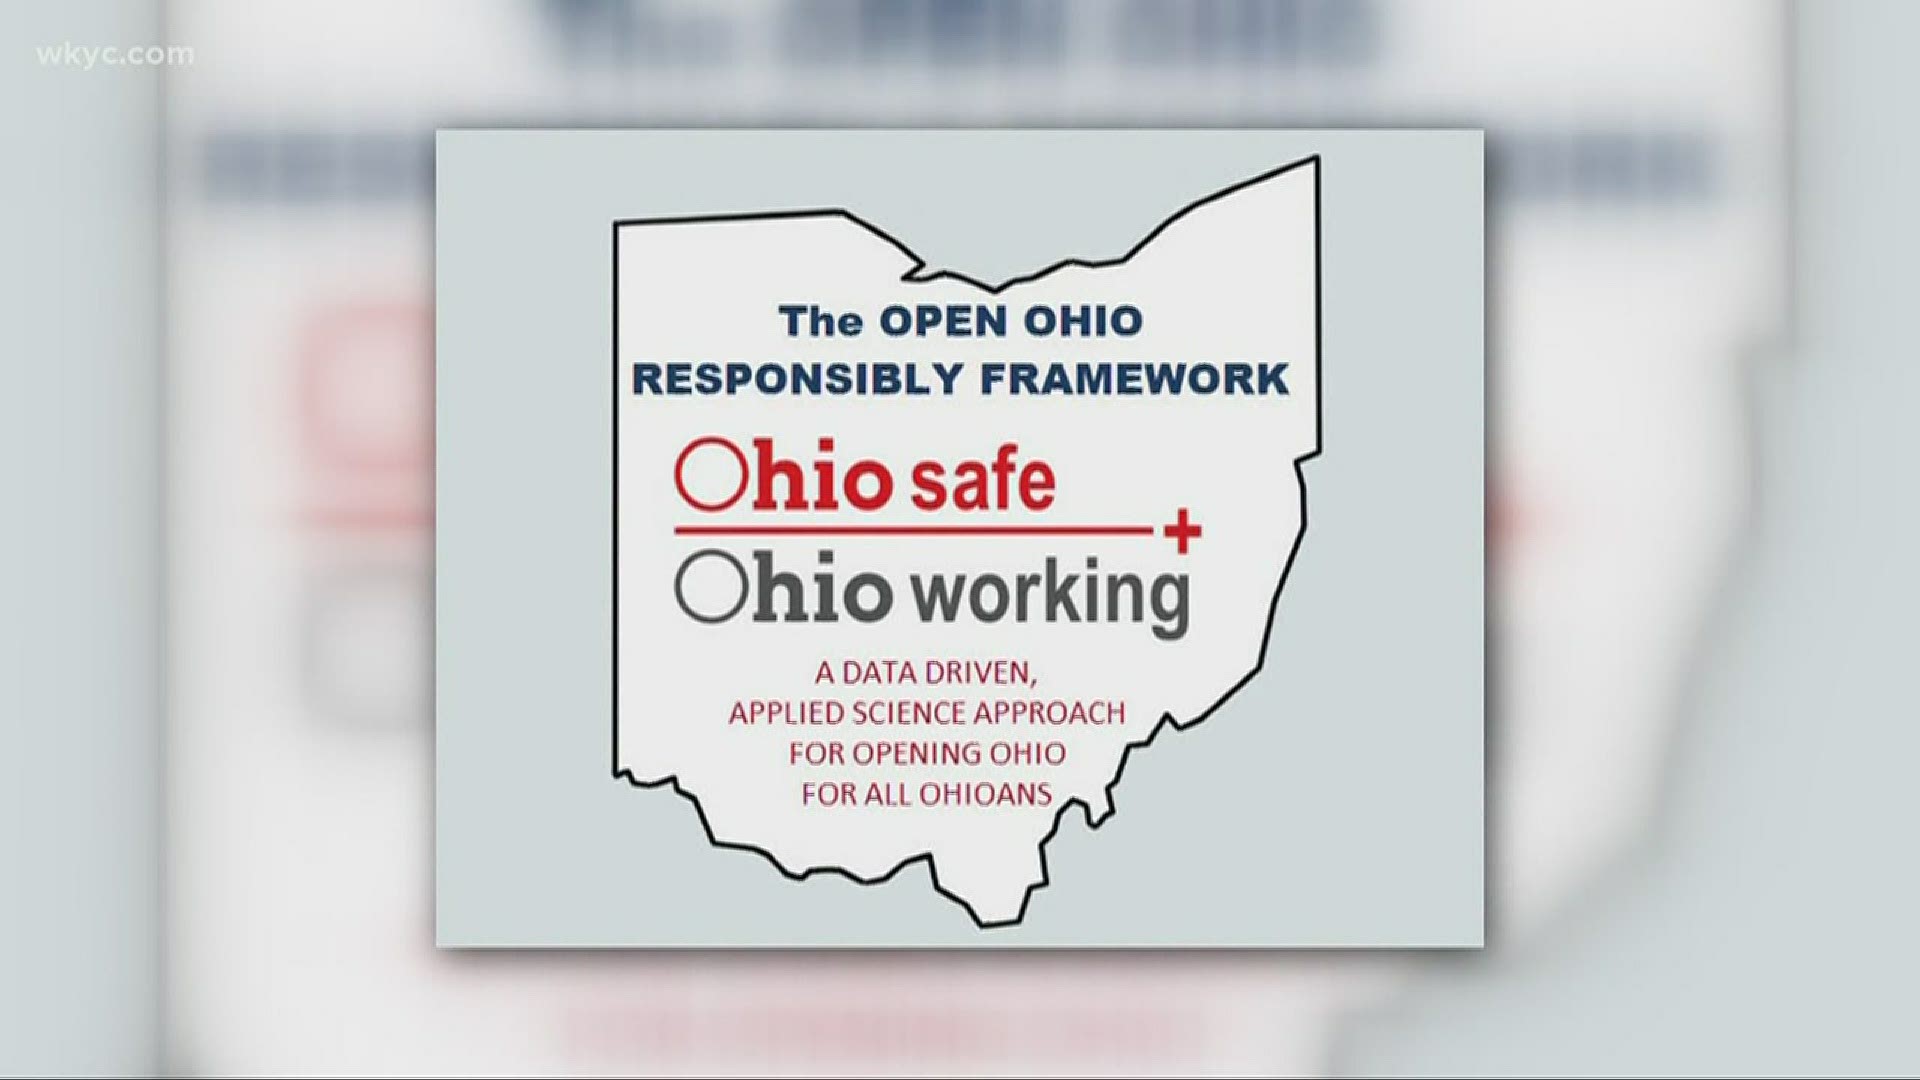 More than two dozen republican state representatives are calling for Ohio to reopen all businesses by May 1st. They hope their plan is taken under consideration.